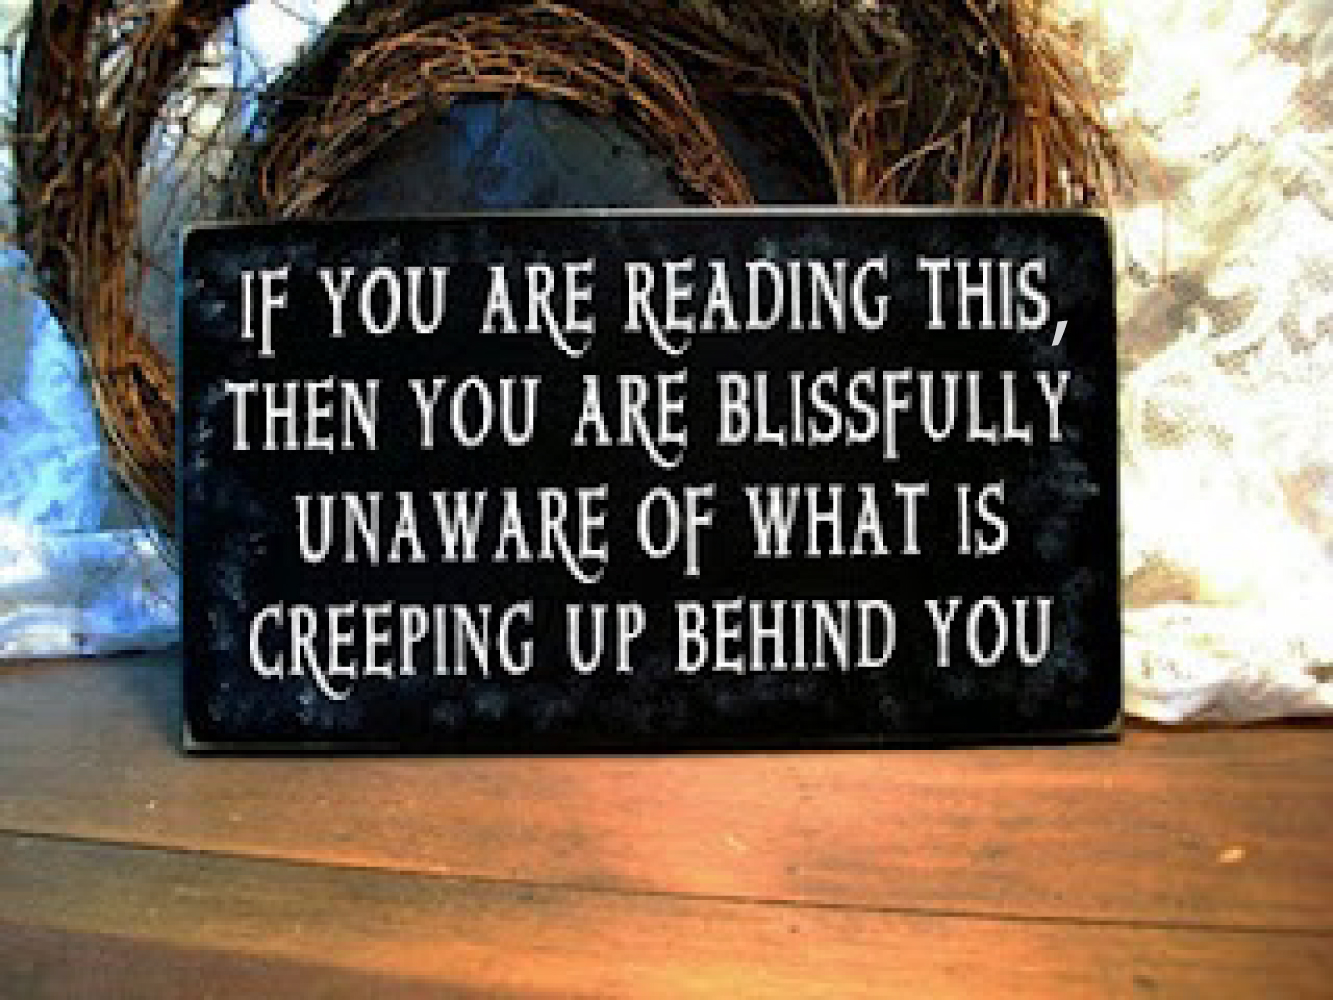 If your reading this